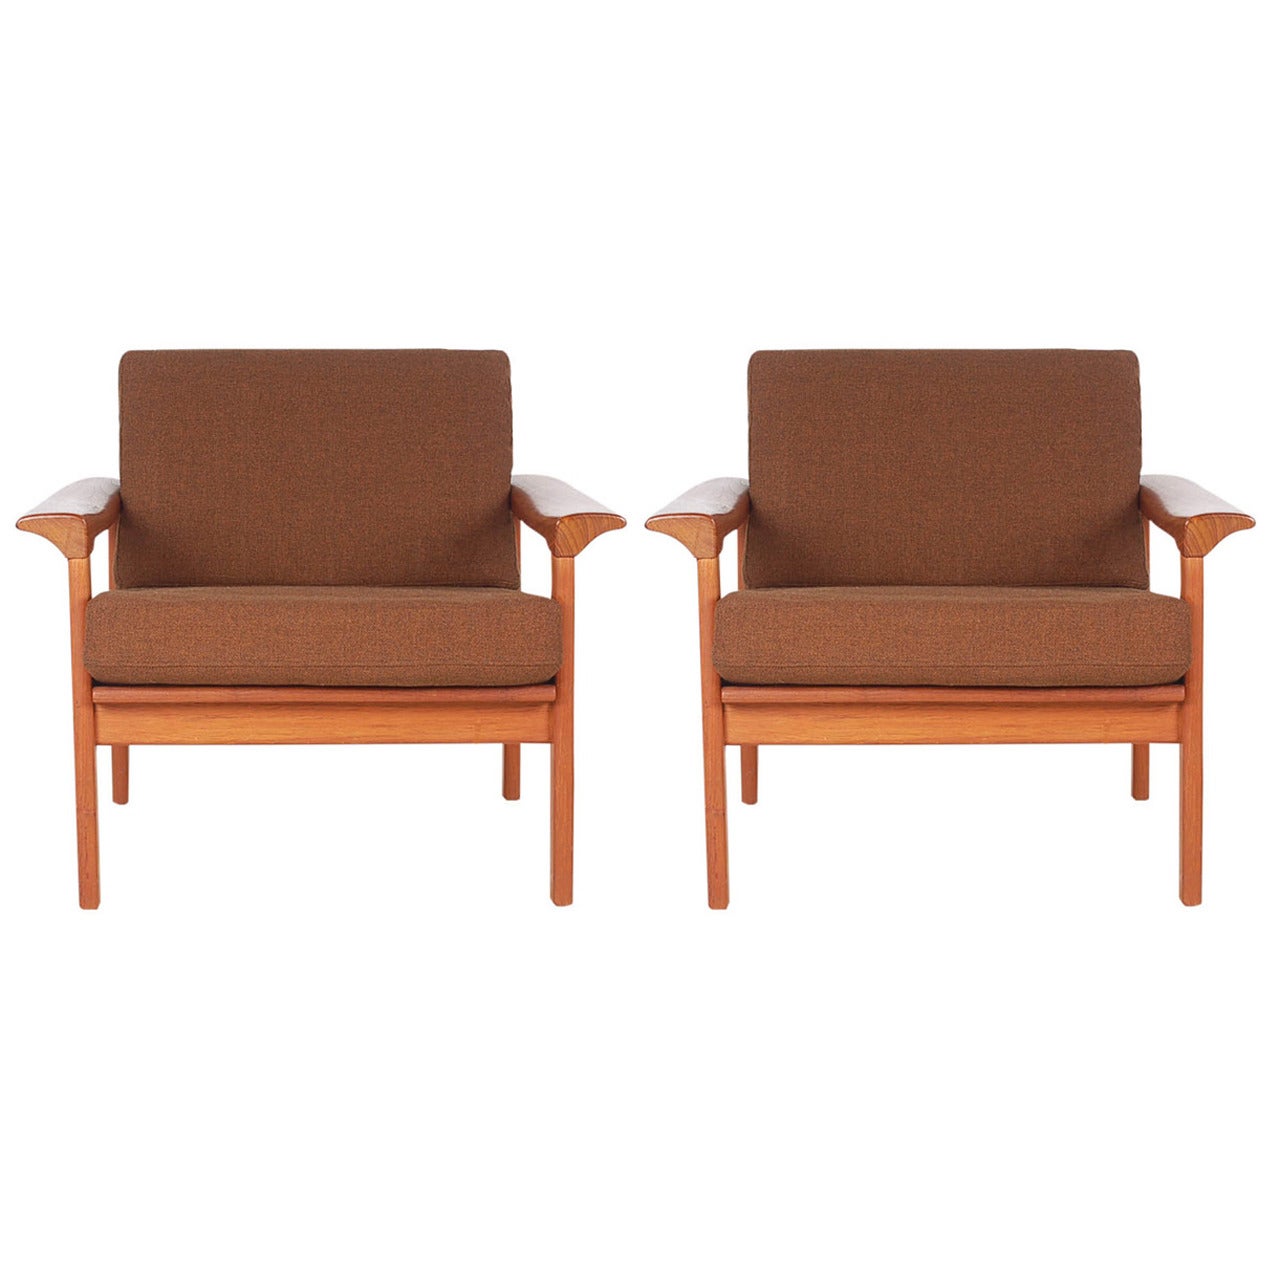 Mid-Century Danish Modern Teak Lounge Chairs in the Manner of Peter Hvidt